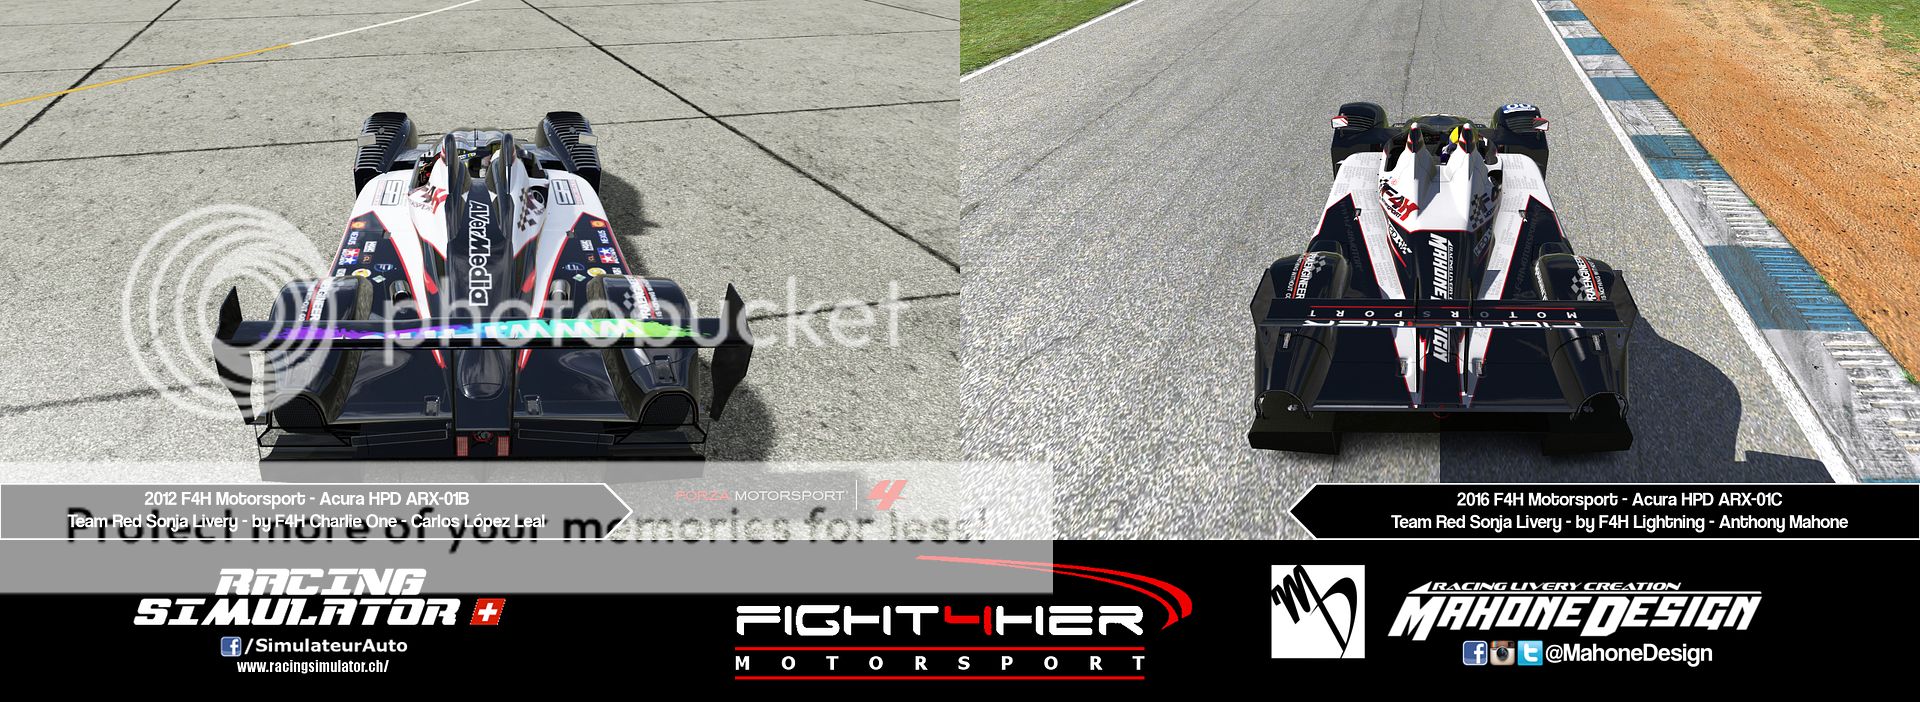 MahoneDesign - Racecar Livery Creation F4H%20Red%20Sonja%20Rear